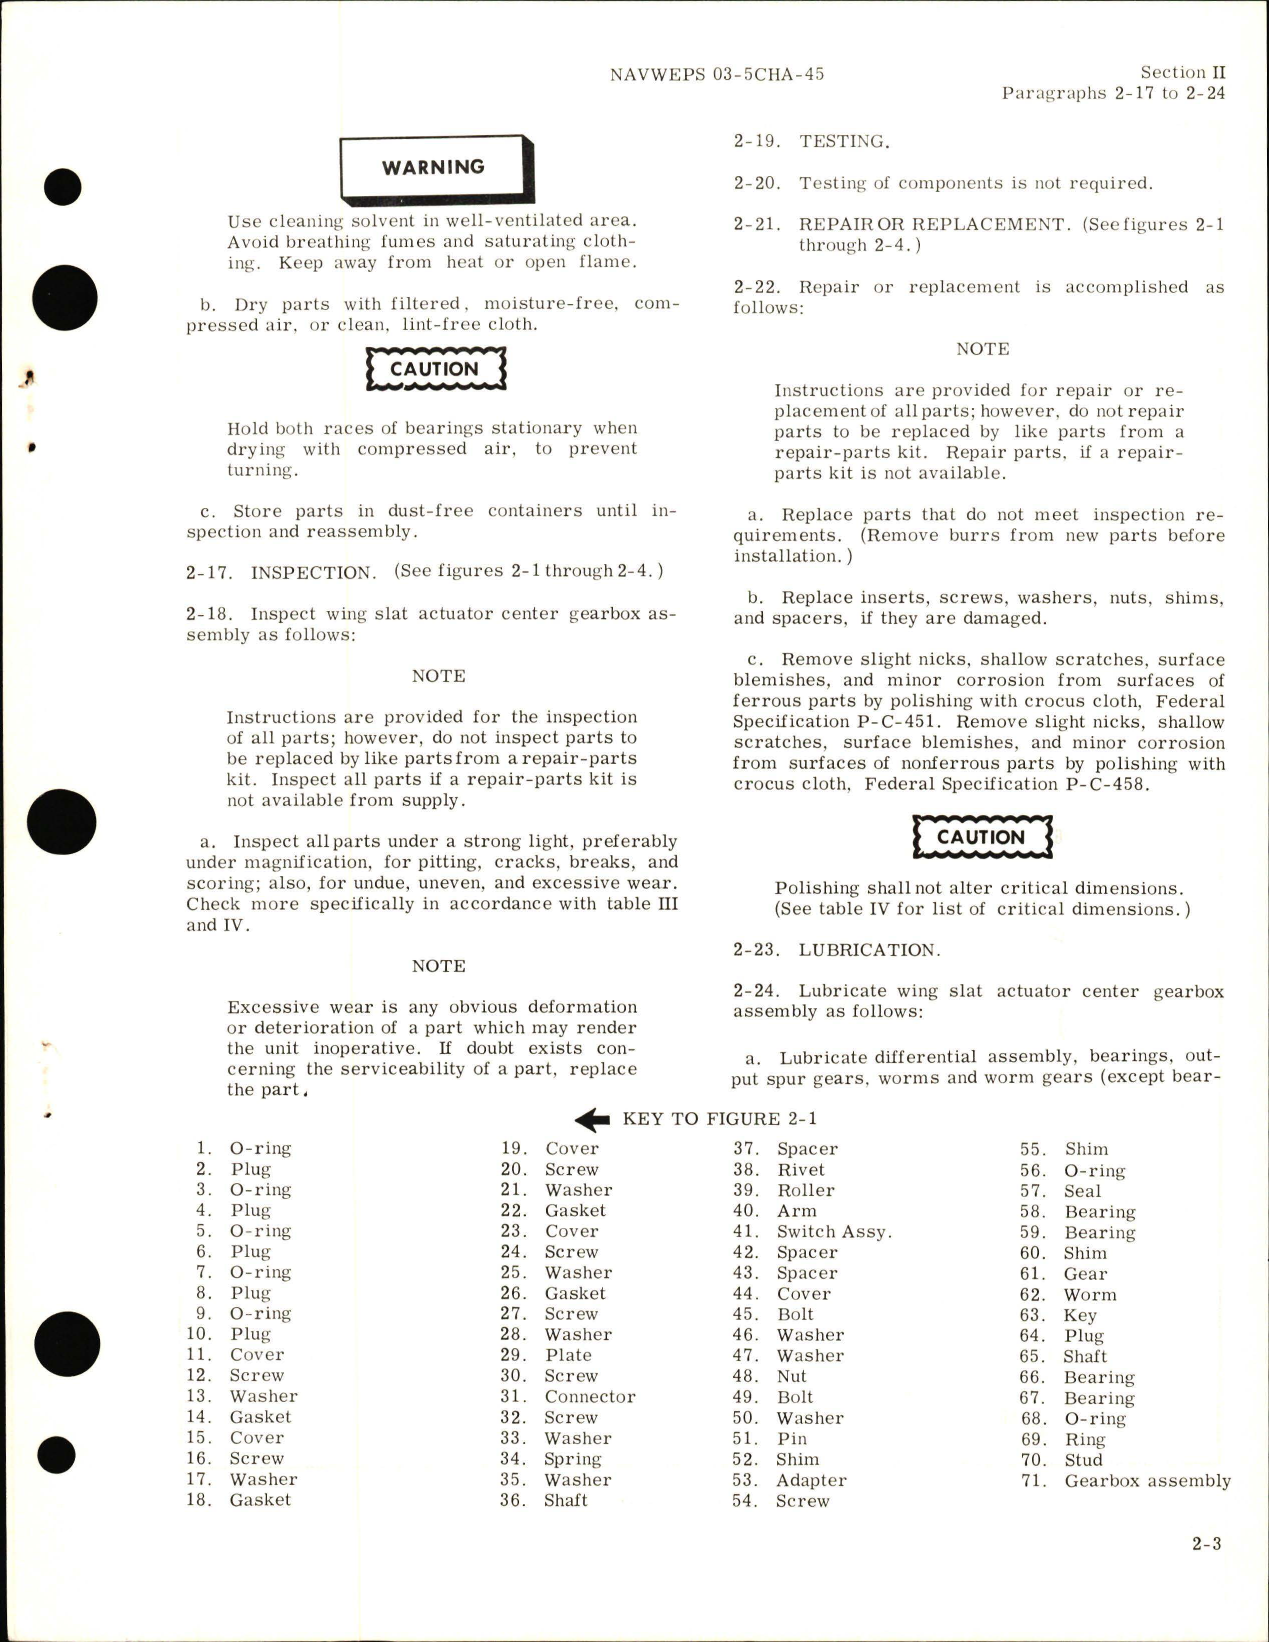 Sample page 7 from AirCorps Library document: Overhaul Instructions for Wing Slat Actuator Center Gearbox Assembly - Part 1372R140 